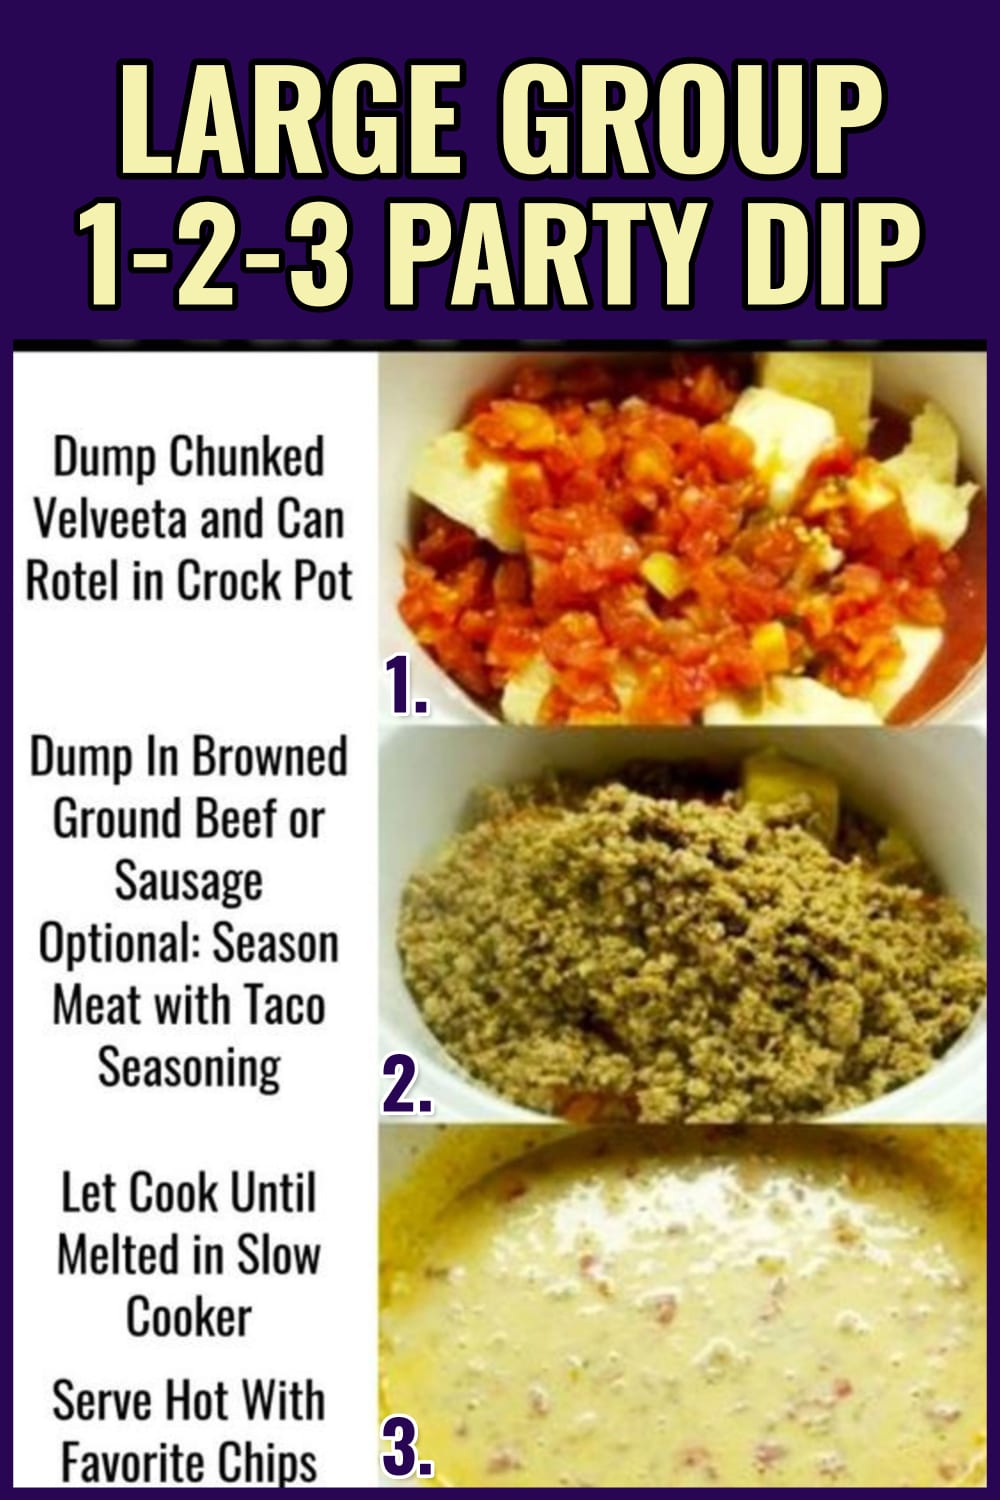 My 1-2-3 party dip recipe is SO cheap and easy to make for any large group - here's the recipe